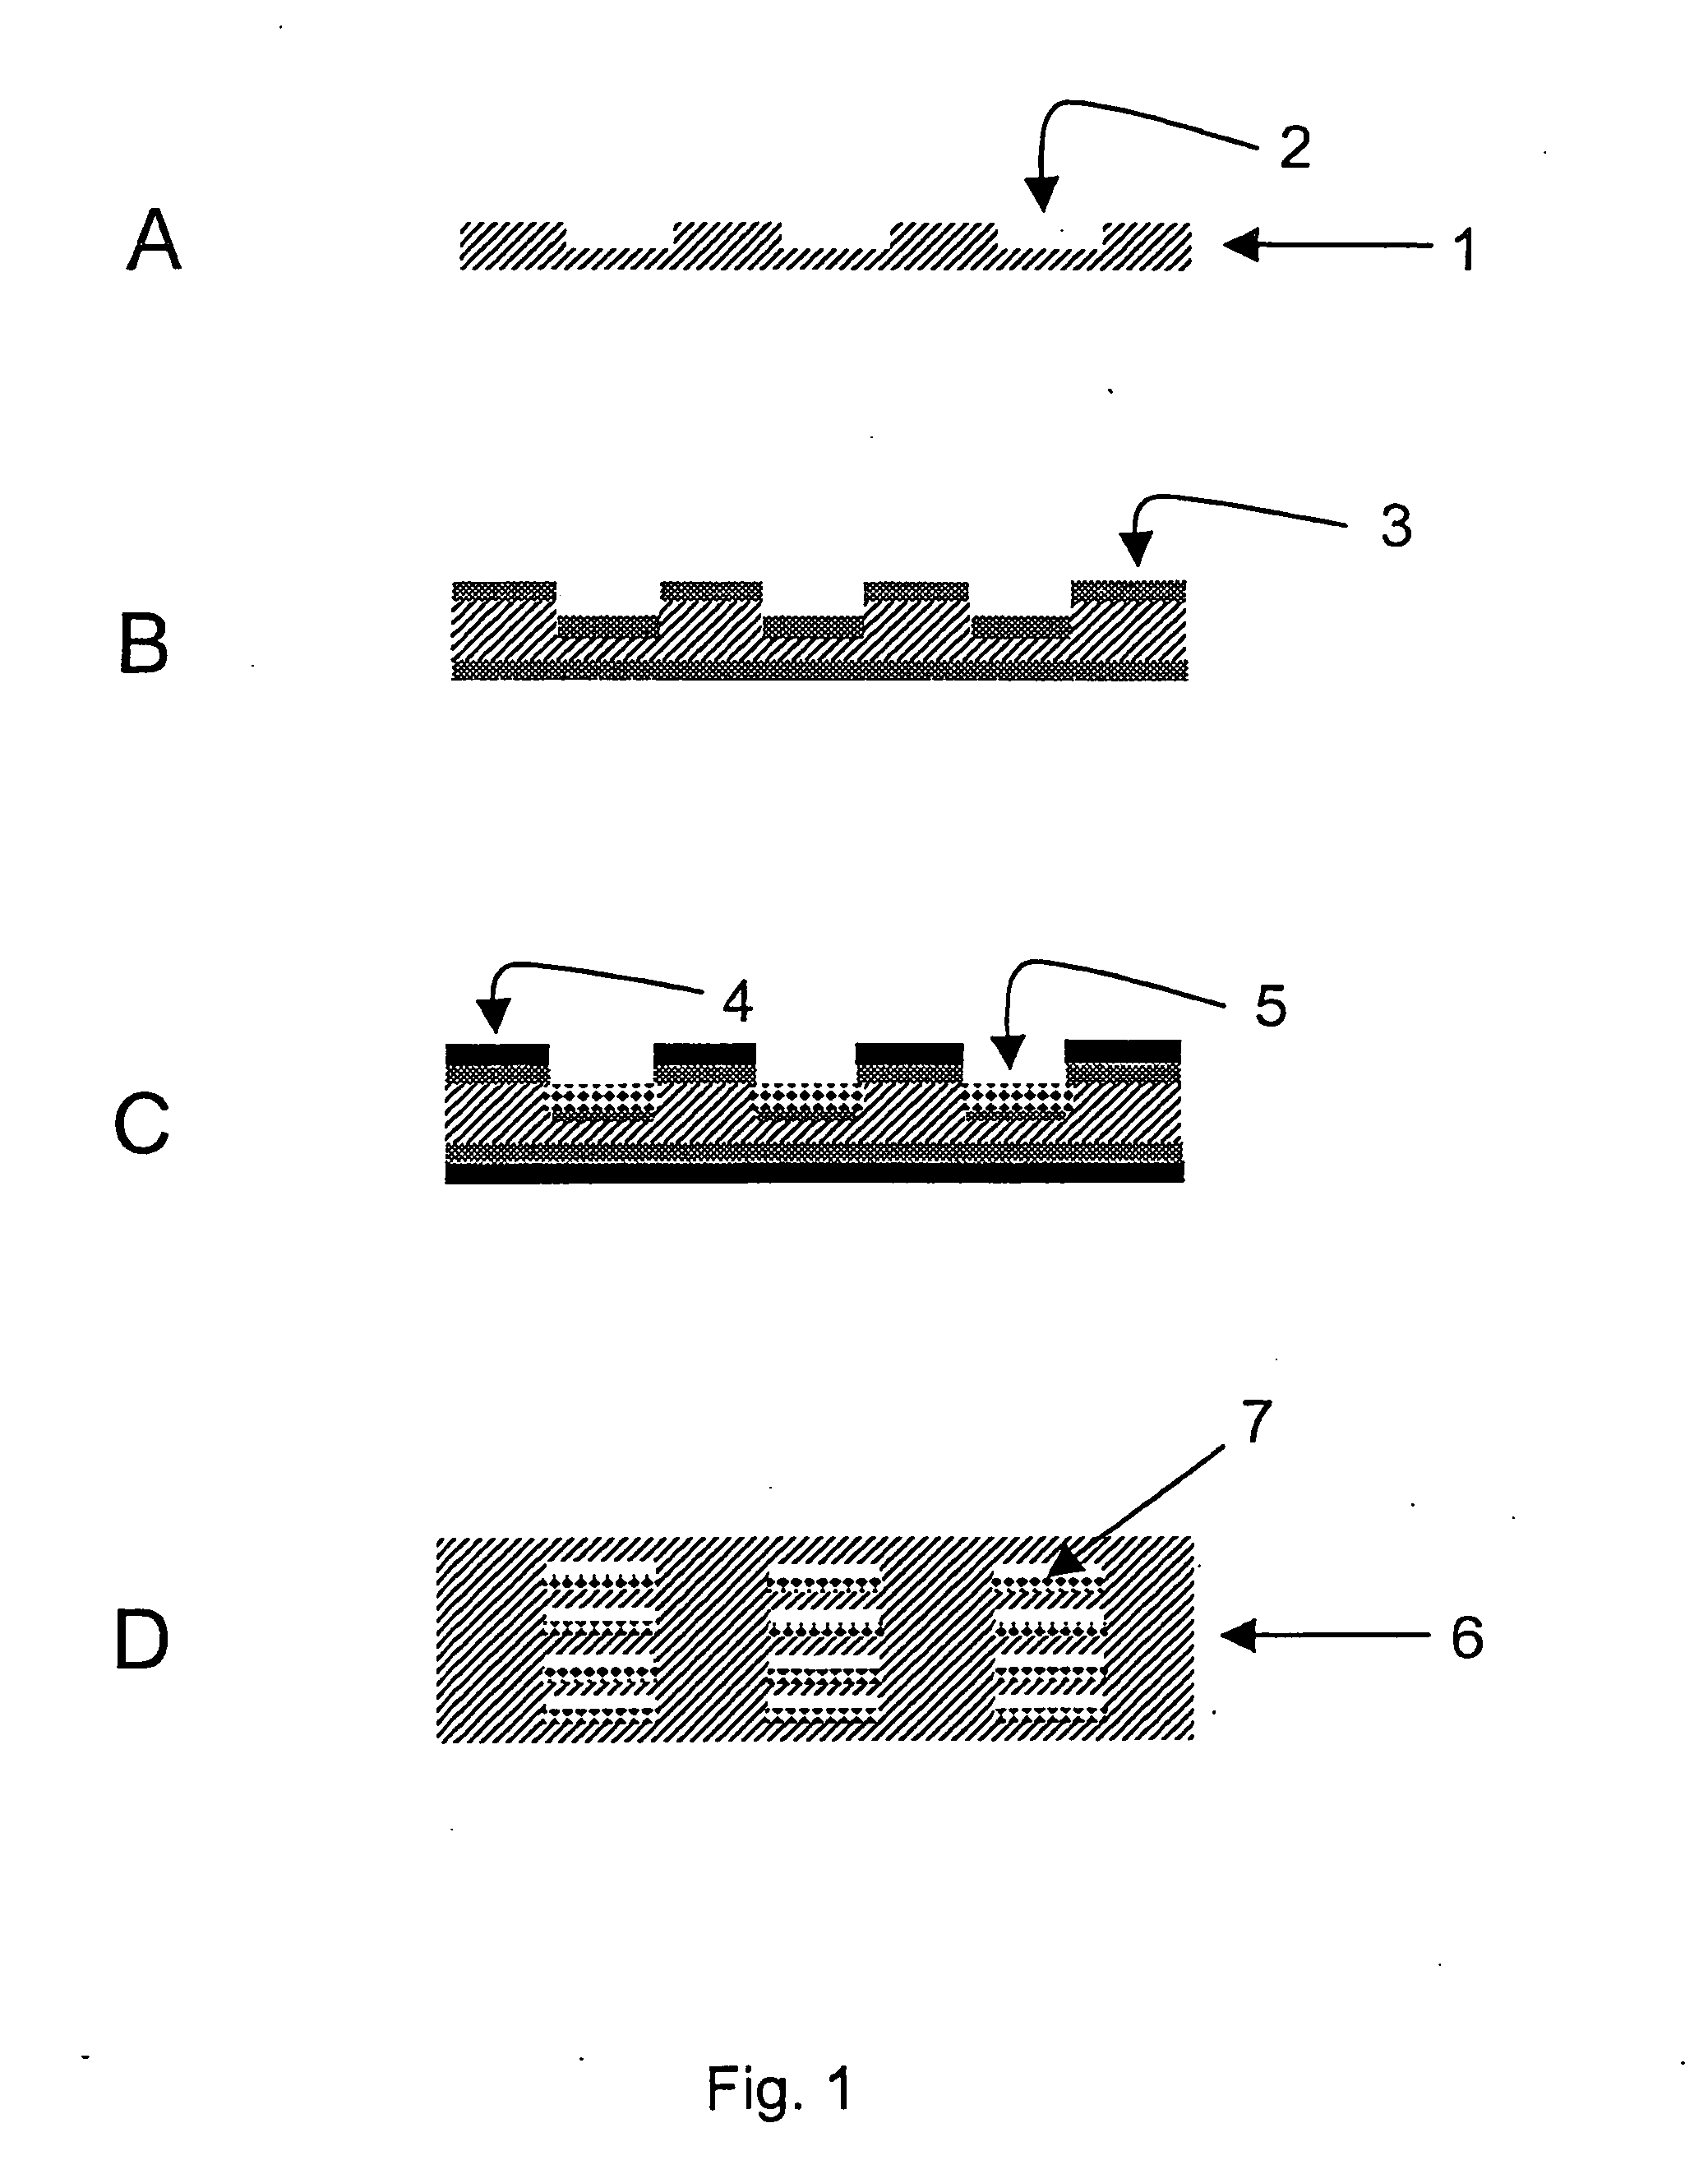 Process for Manufacturing a Microreactor and Its Use as a Reformer